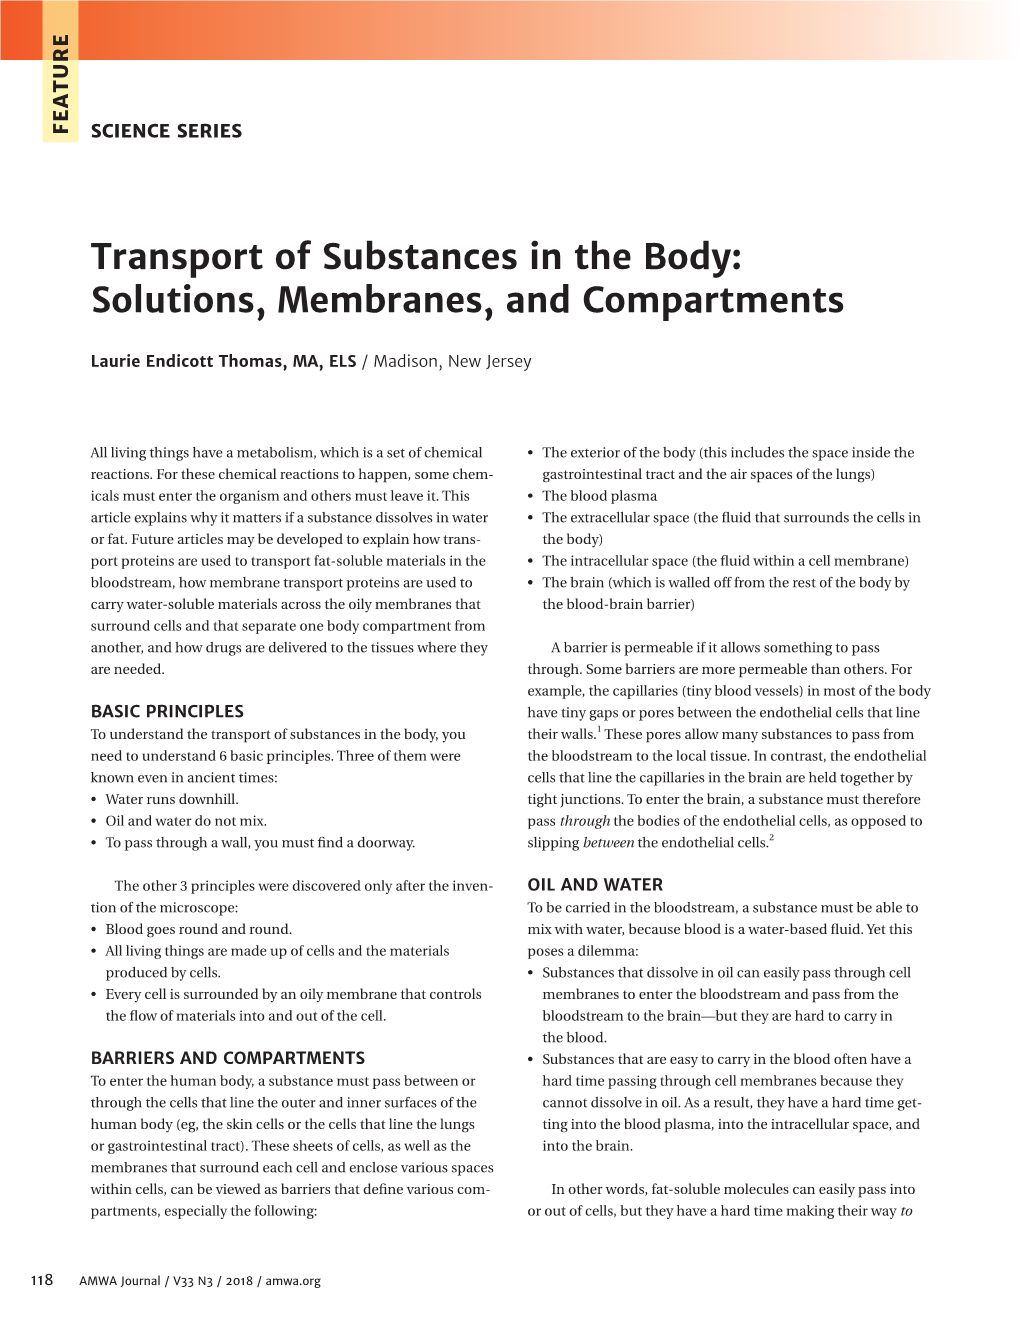 Transport of Substances in the Body: Solutions, Membranes, and Compartments